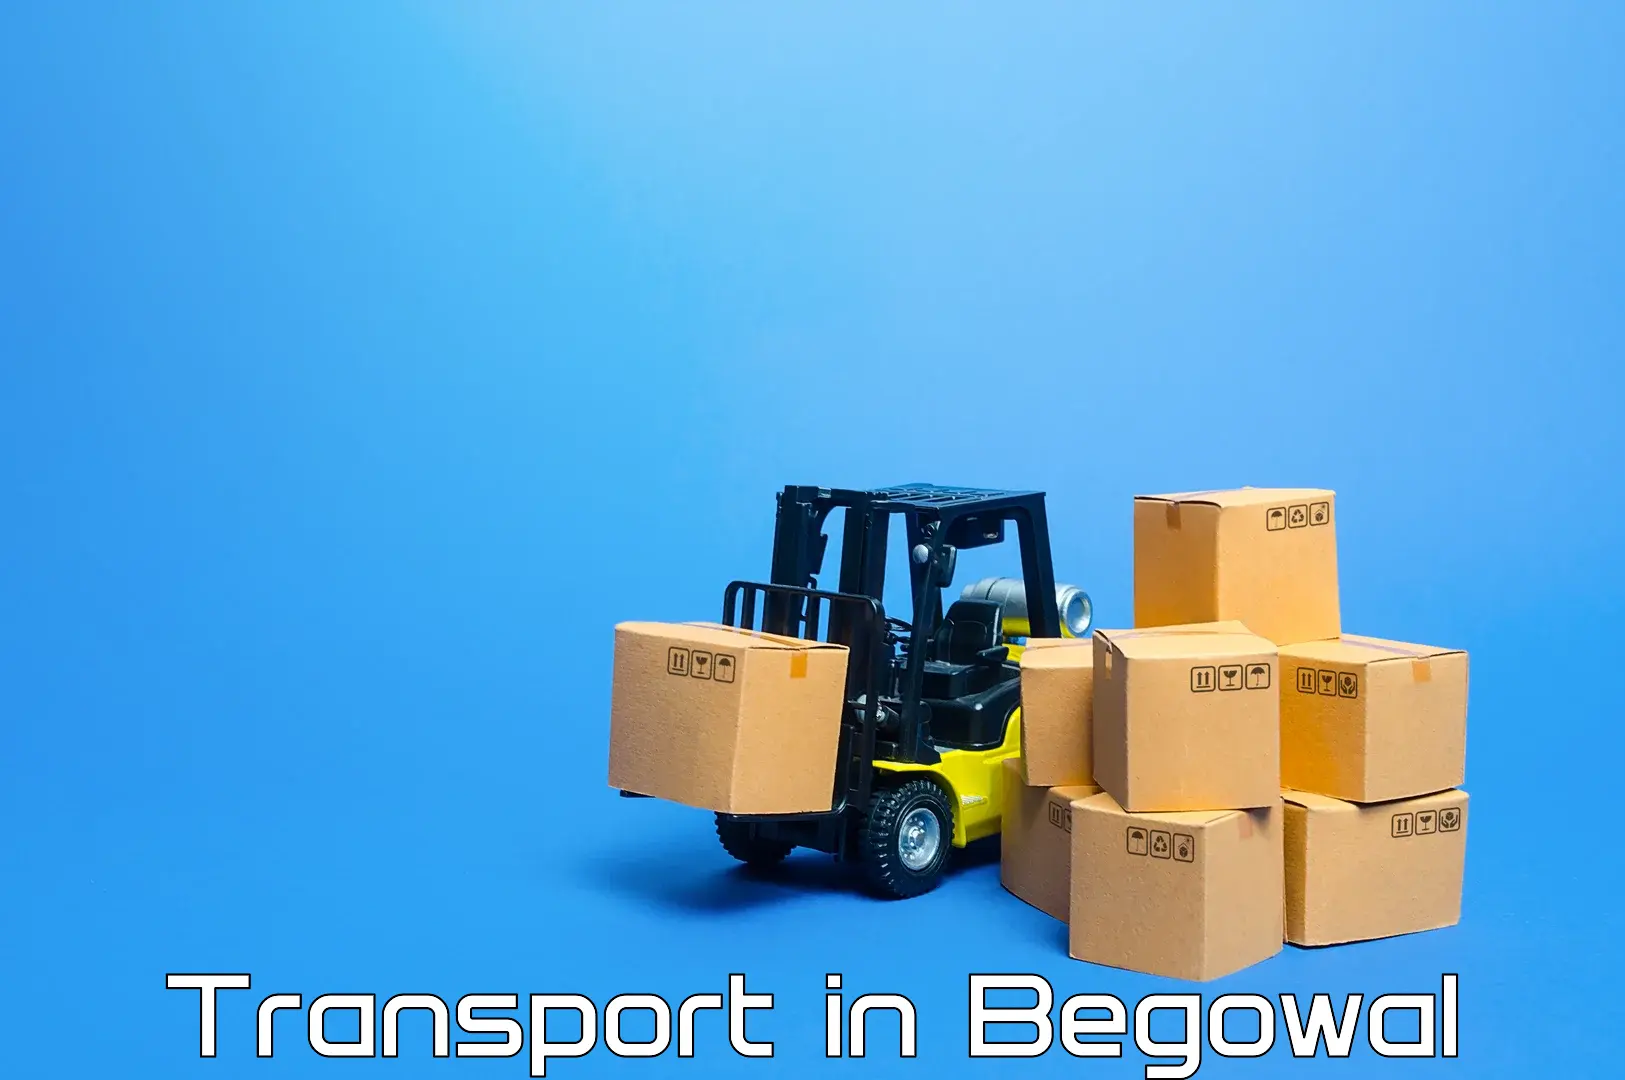 Luggage transport services in Begowal